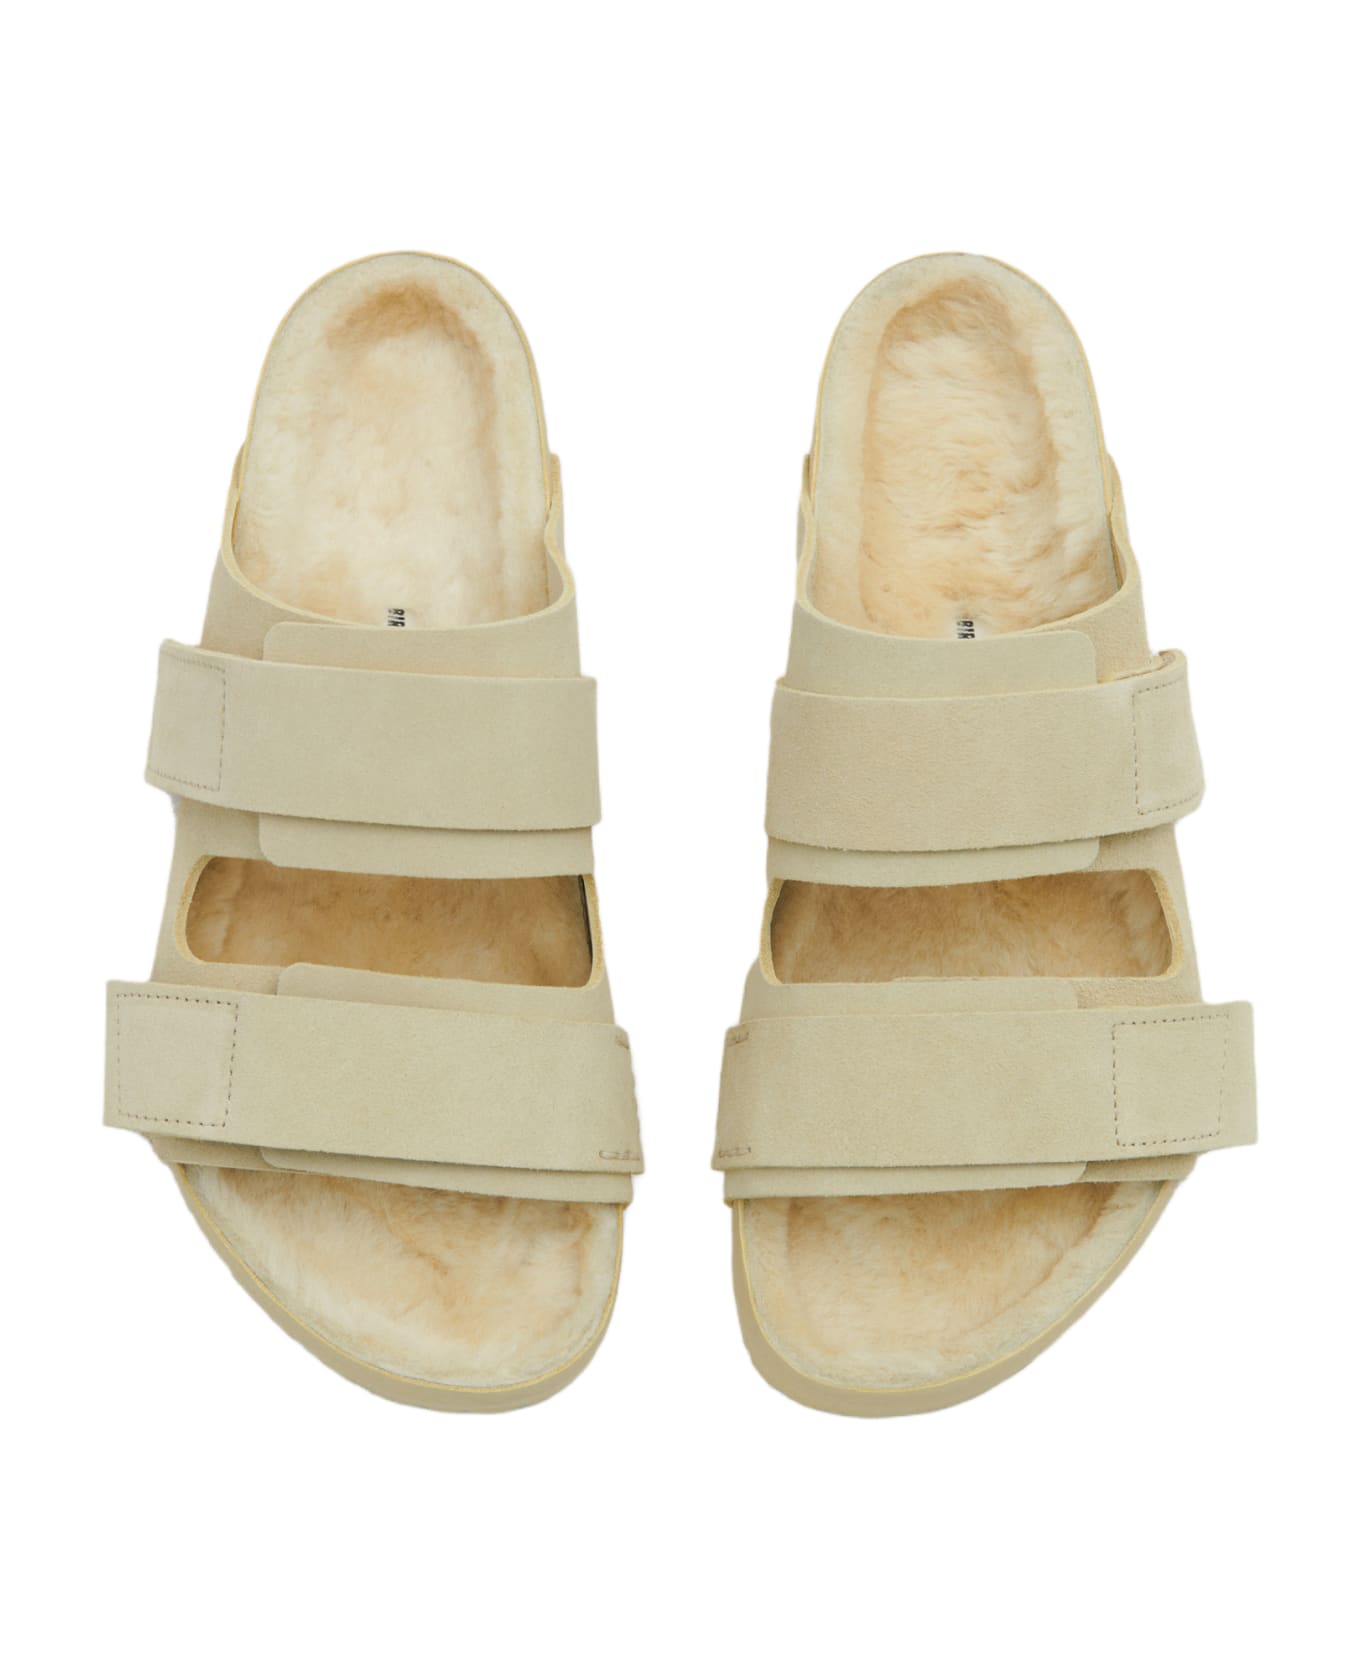 Birkenstock Uji Suede And Leather Slippers - STRAW フラットシューズ